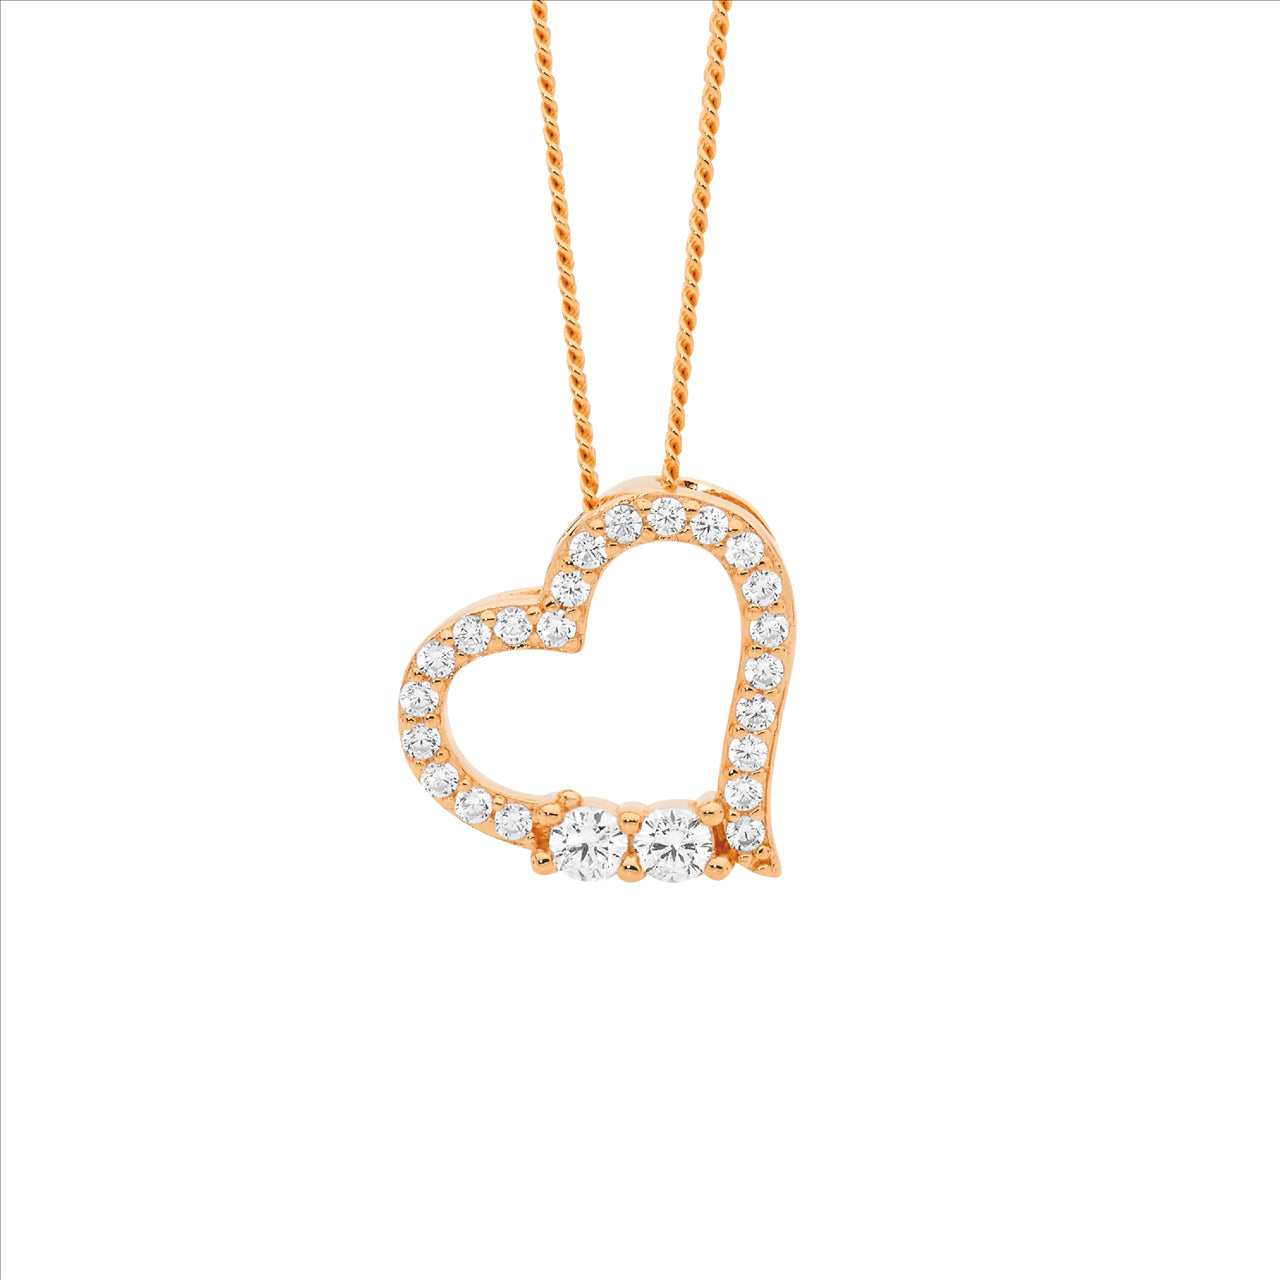 Open Heart Necklace Cubic Zirconias - Rose Gold Plated